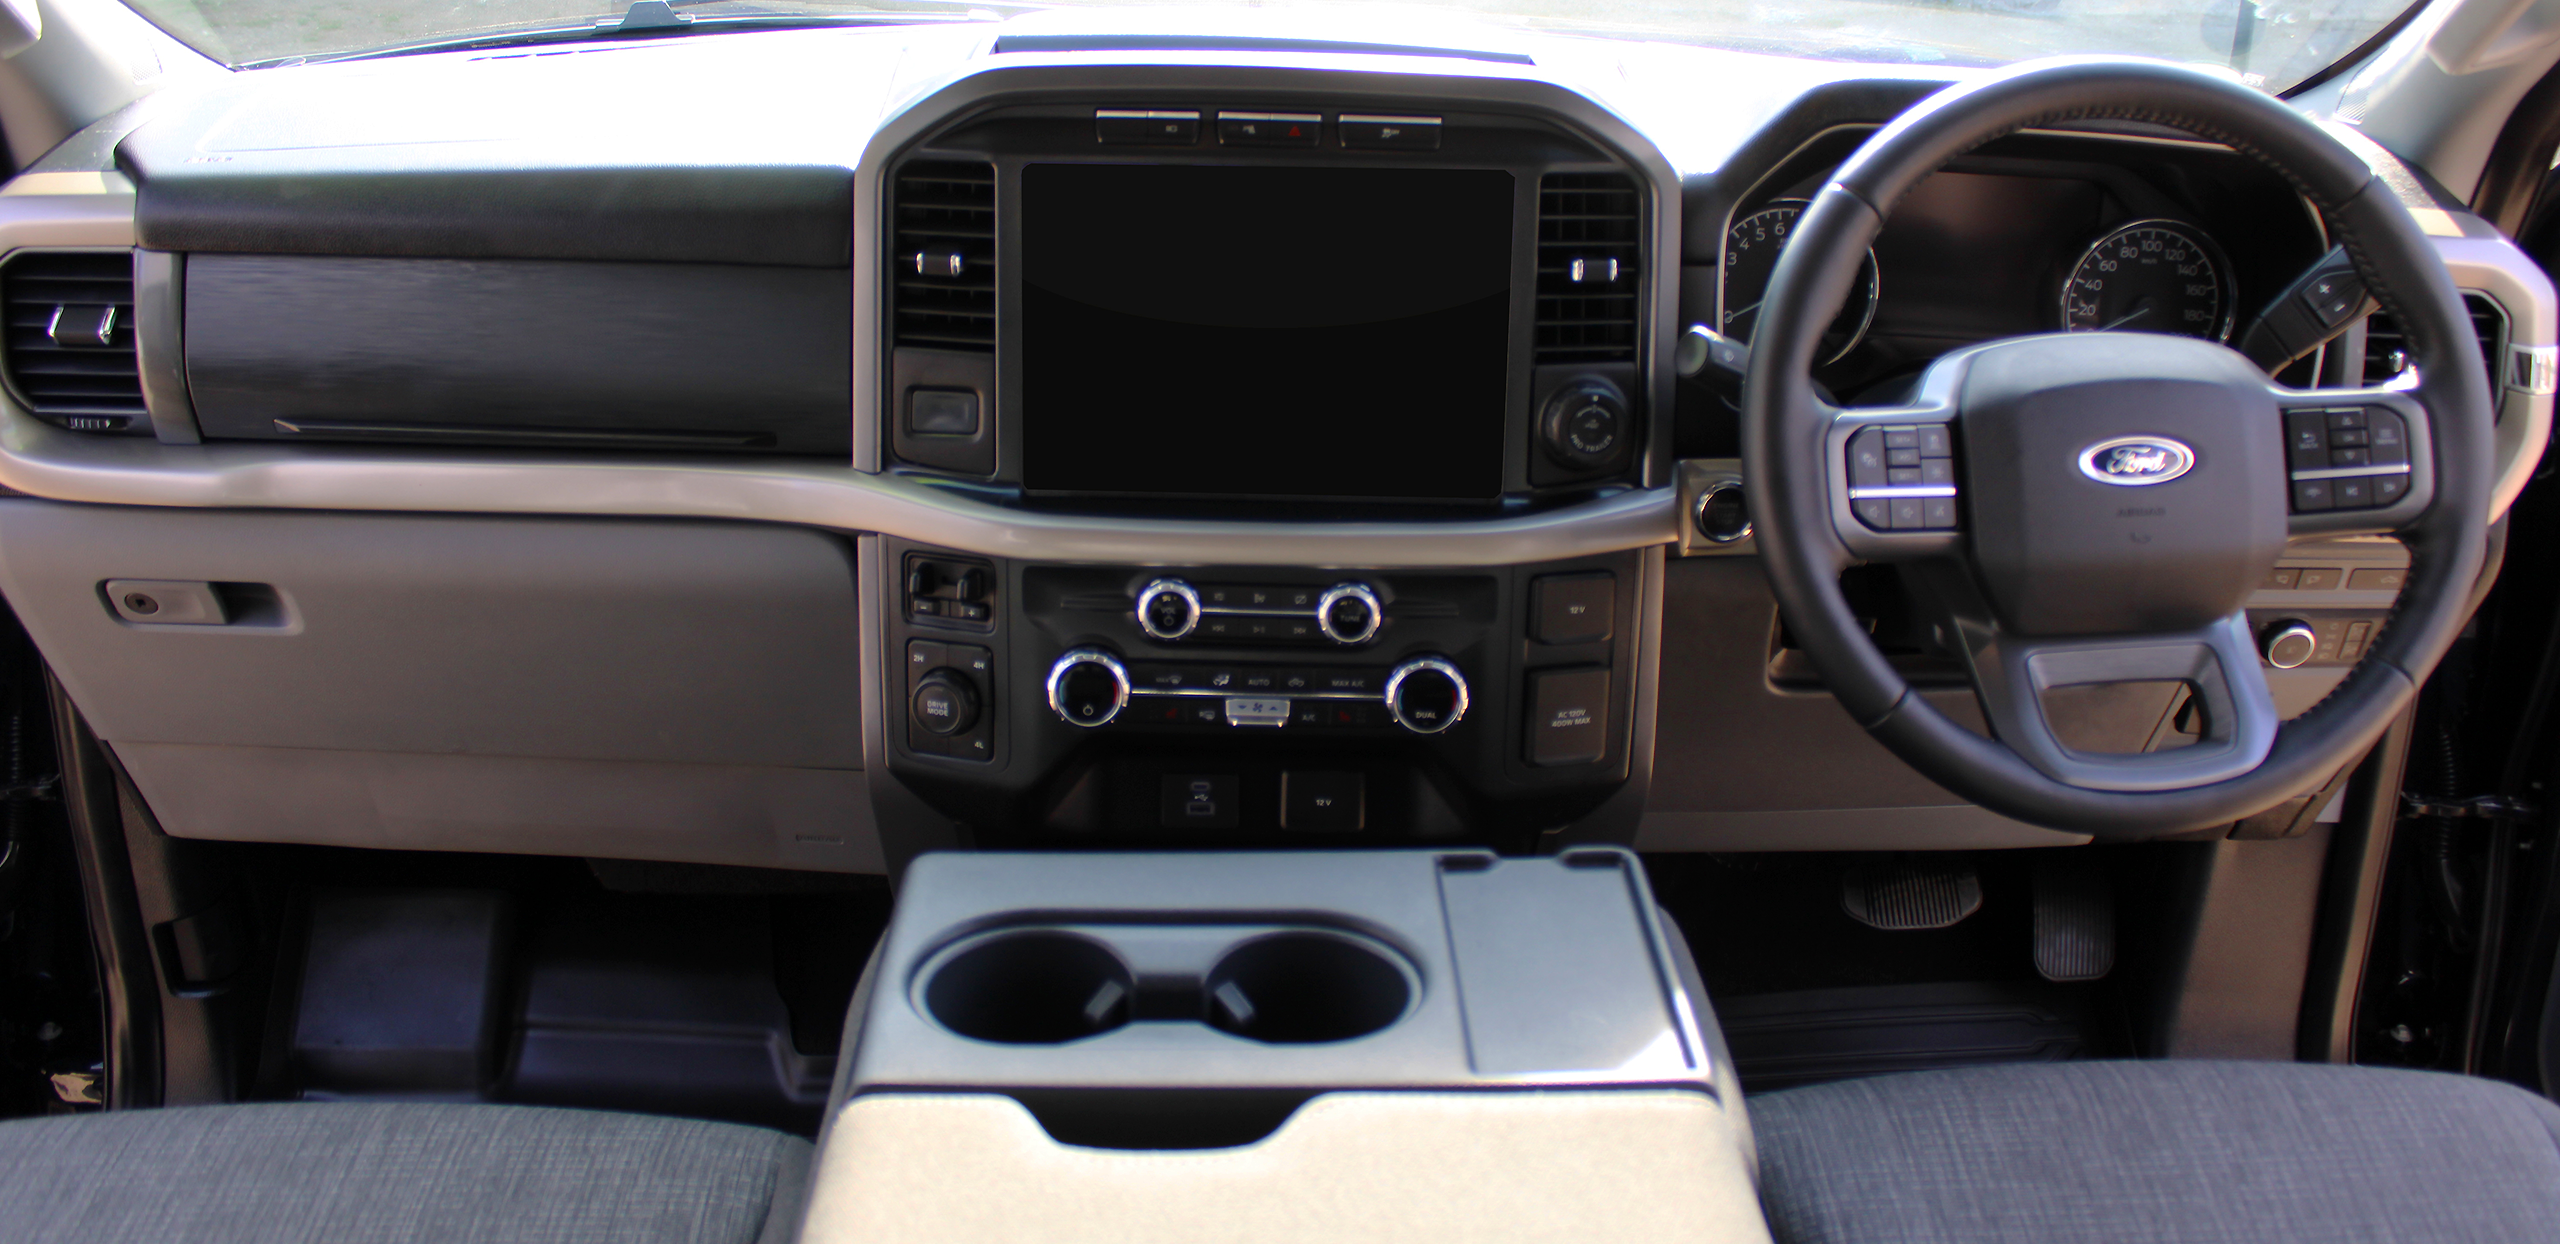 ford f-150 limited right hand drive conversion dash board view